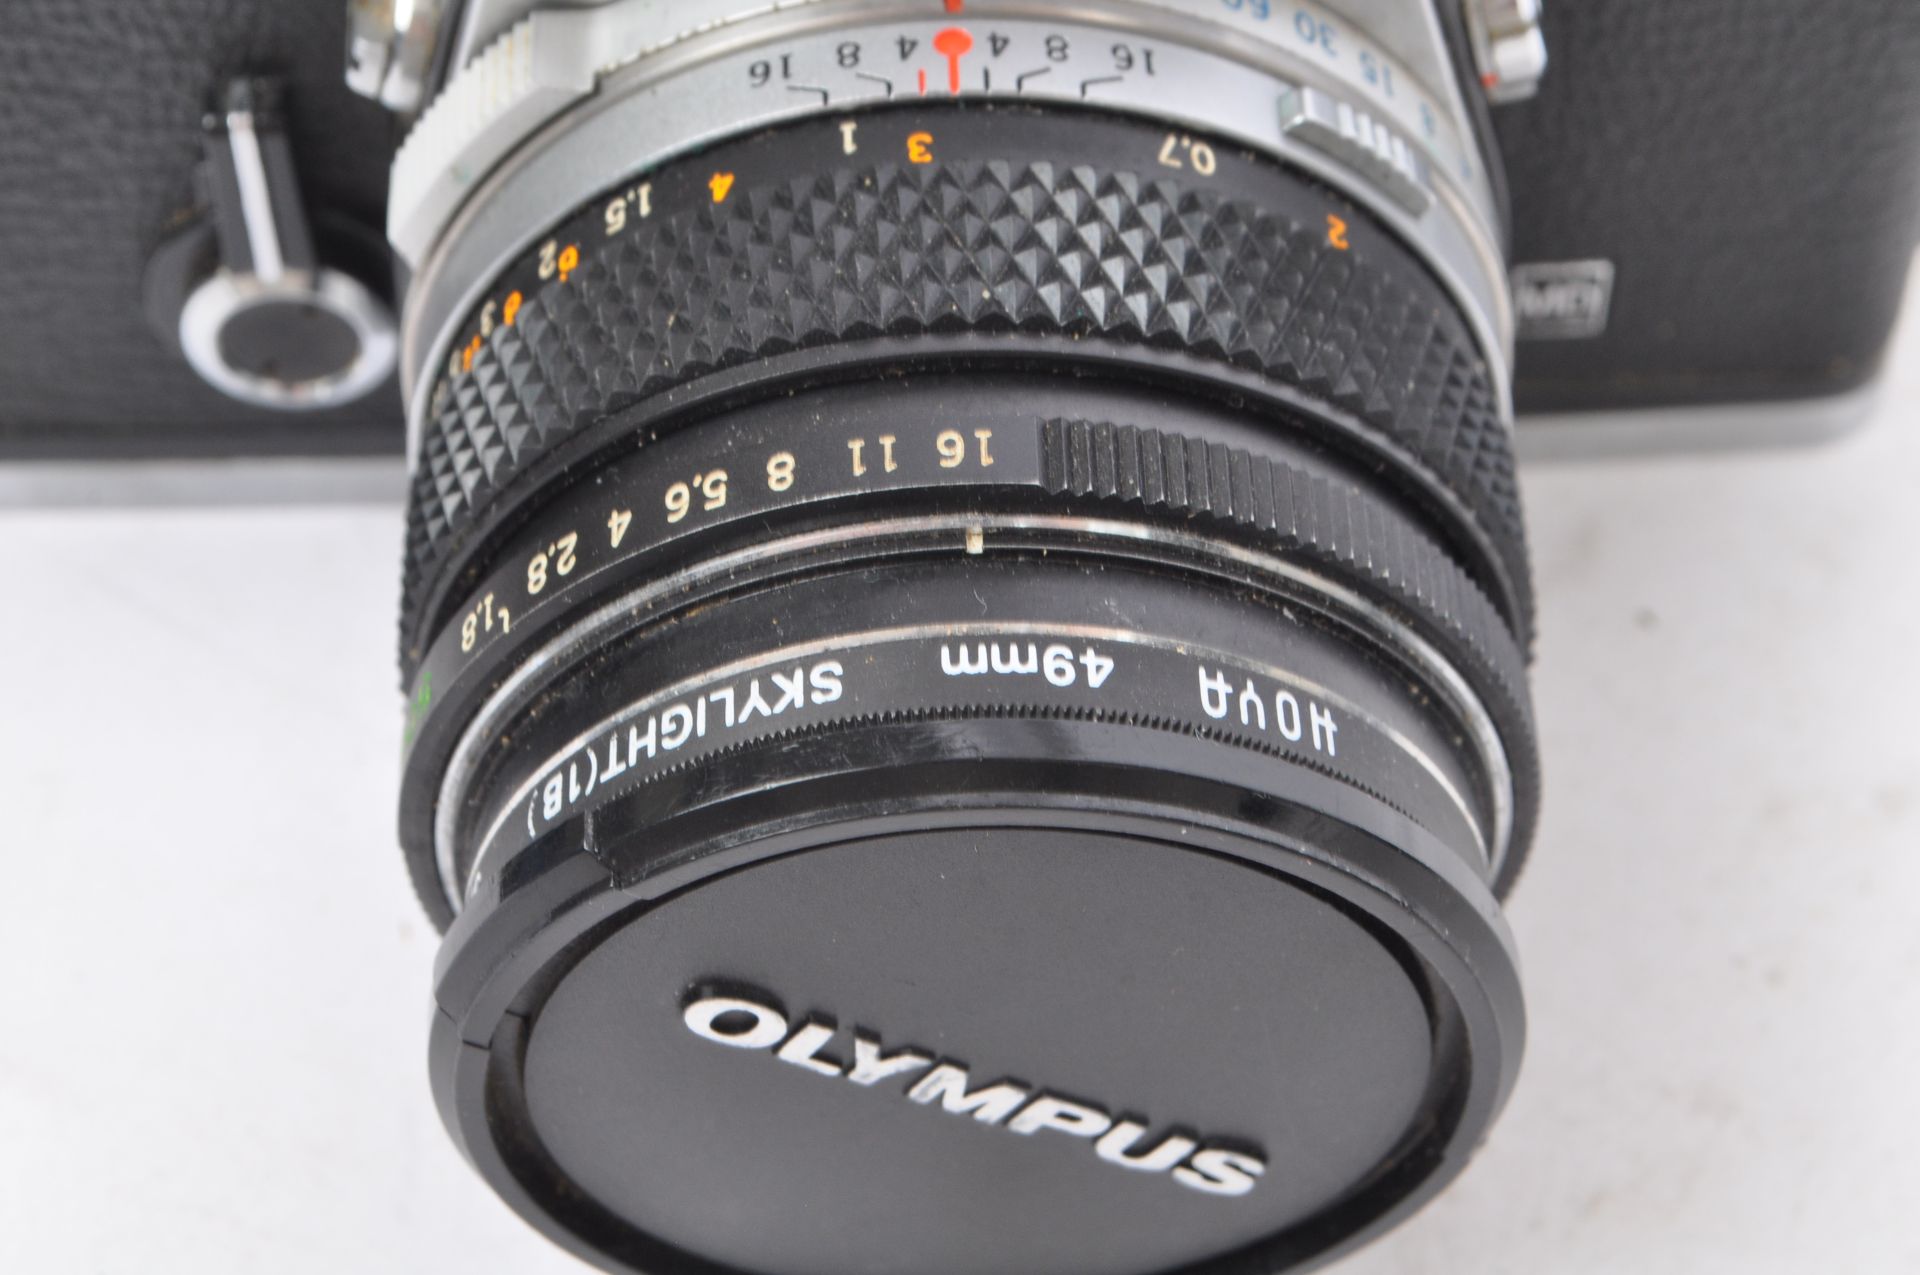 1970S OLYMPUS OM1 MD 35MM SLR AND LENSES - Image 3 of 7